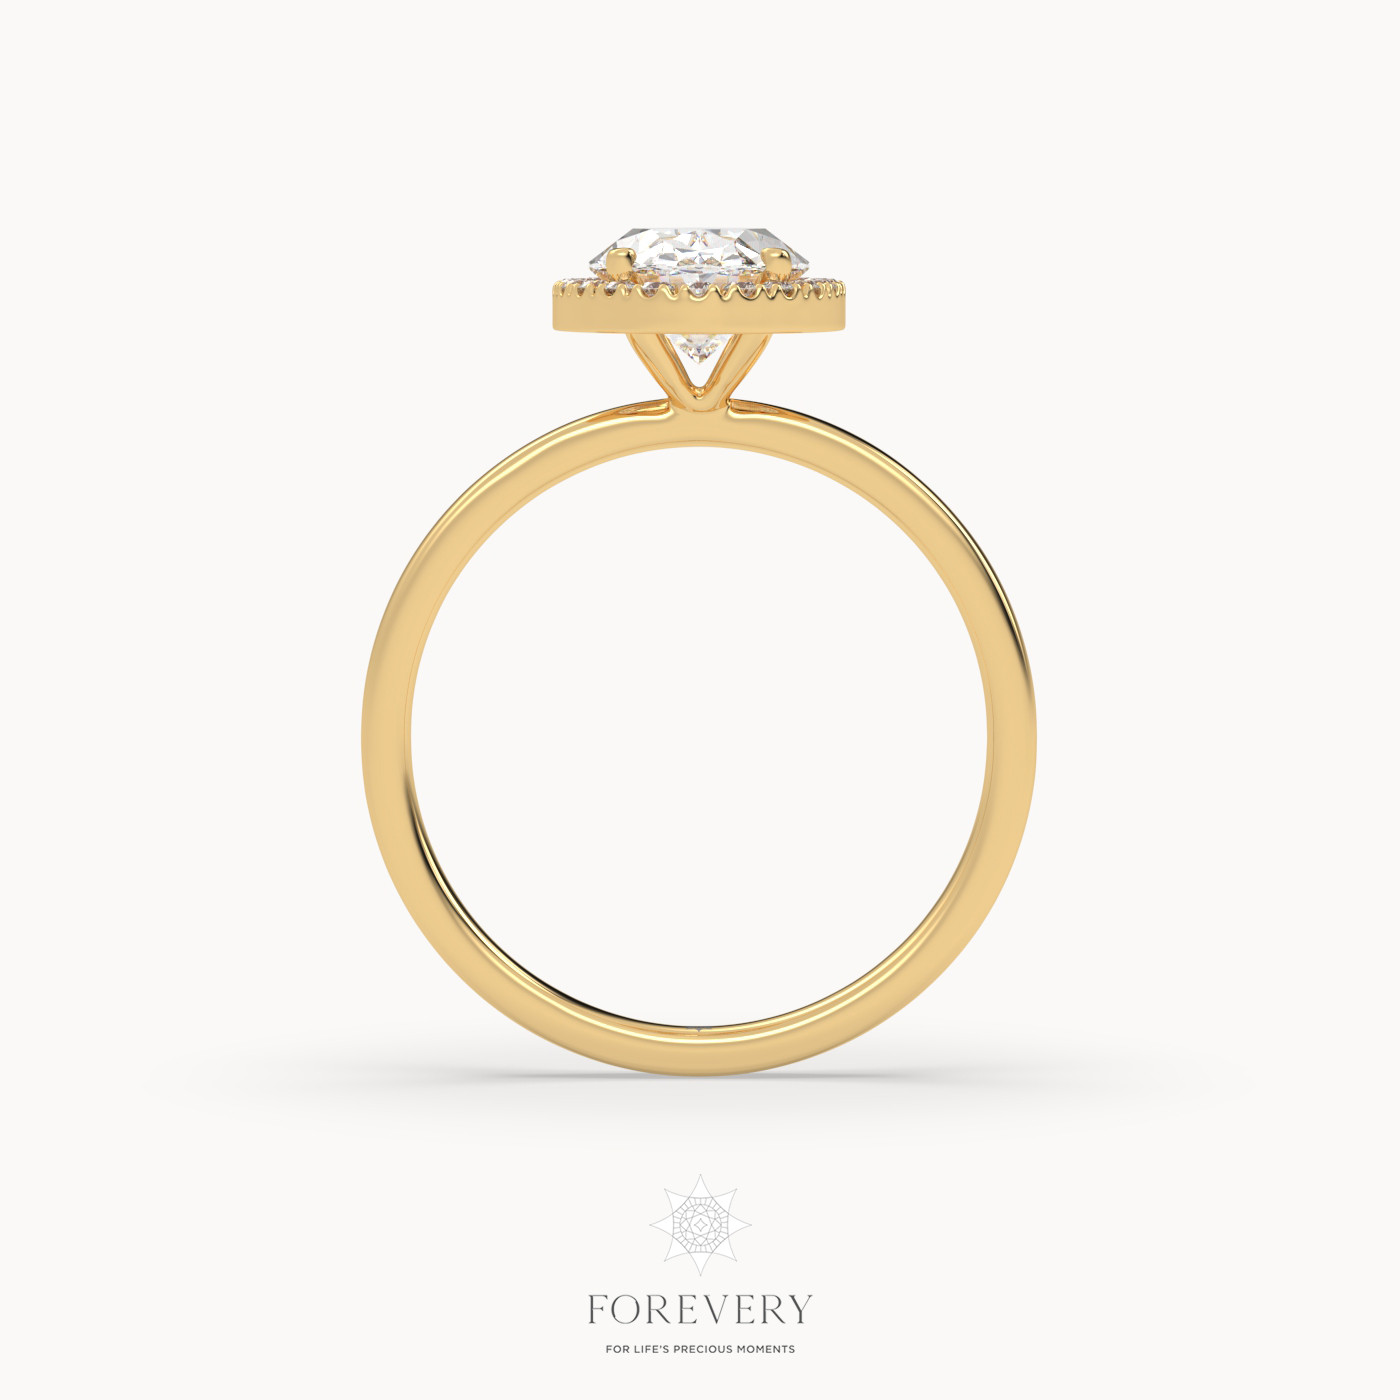 18K YELLOW GOLD Oval Diamond Cut Halo Engagement Ring with Plain Band